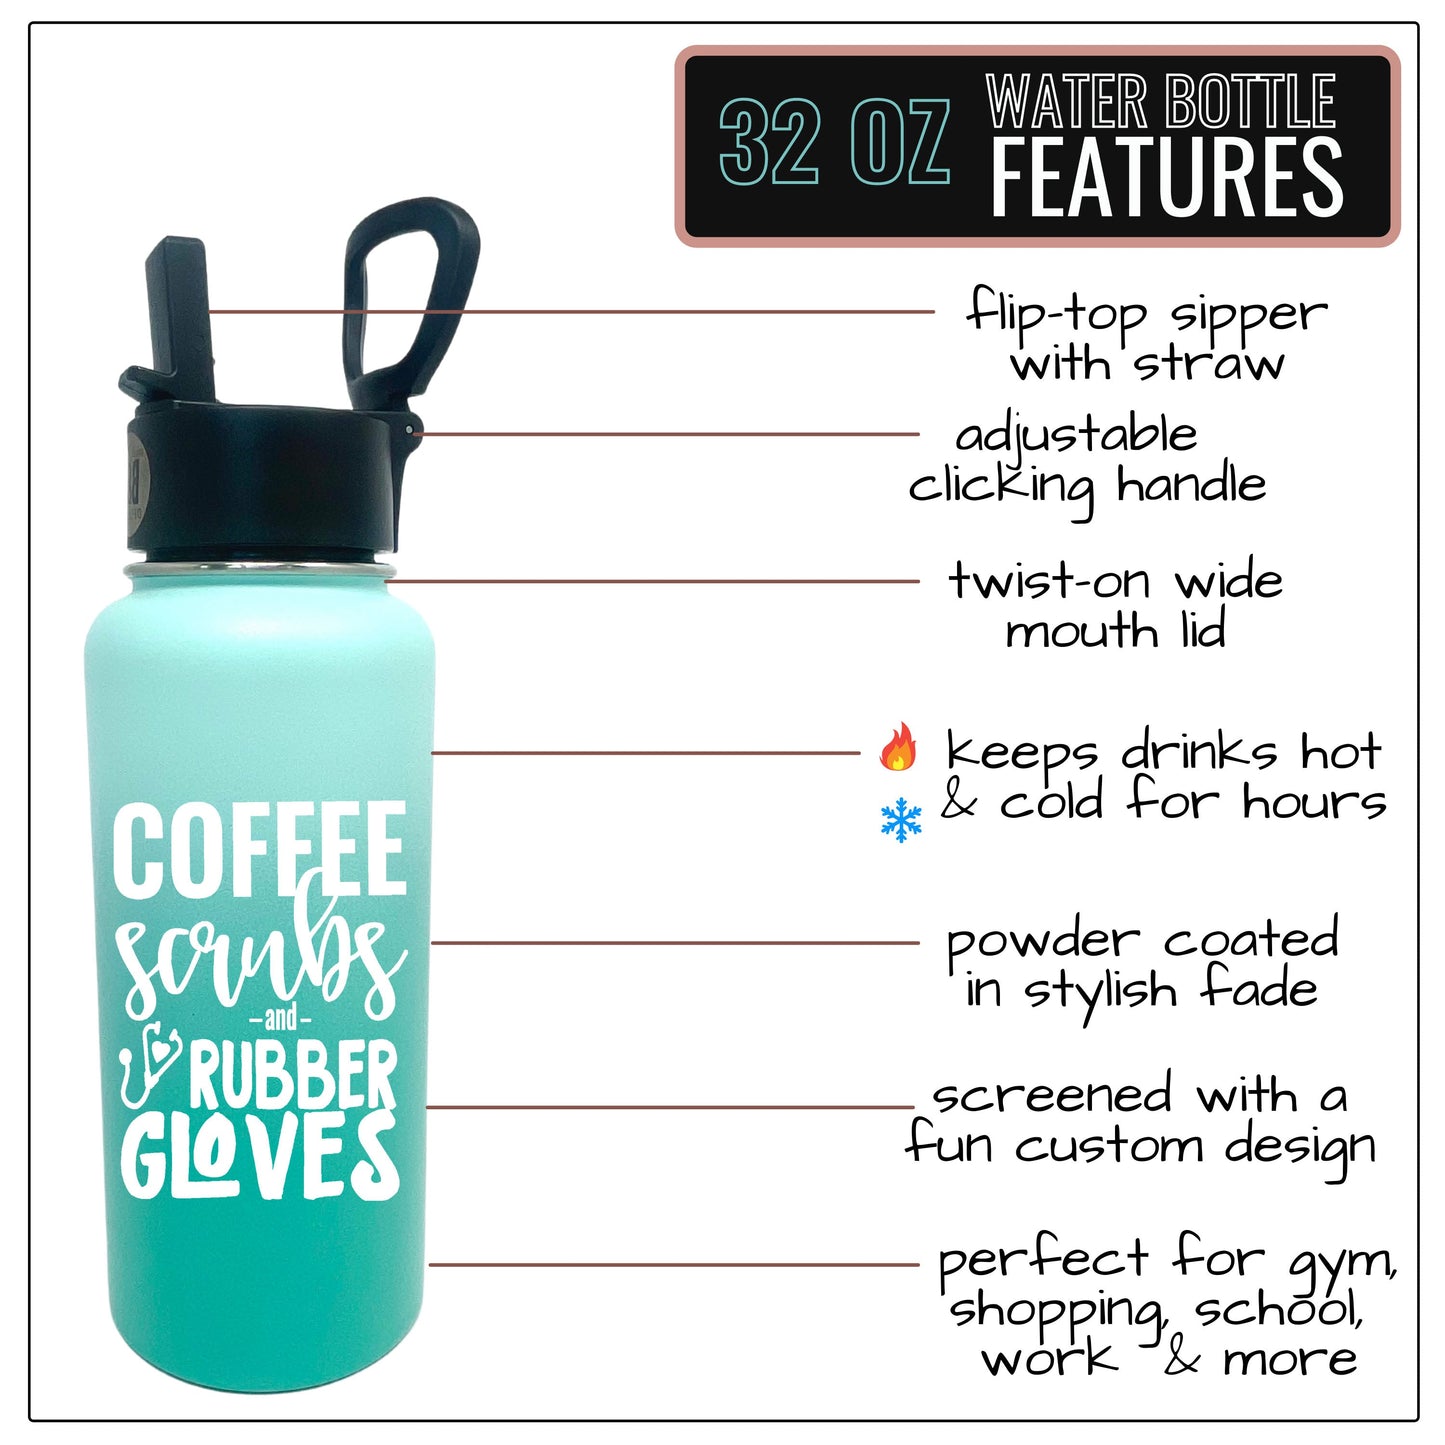 Coffee Scrubs 32 oz Teal Water Bottle for Medical Workers - Outlet Deals Texas